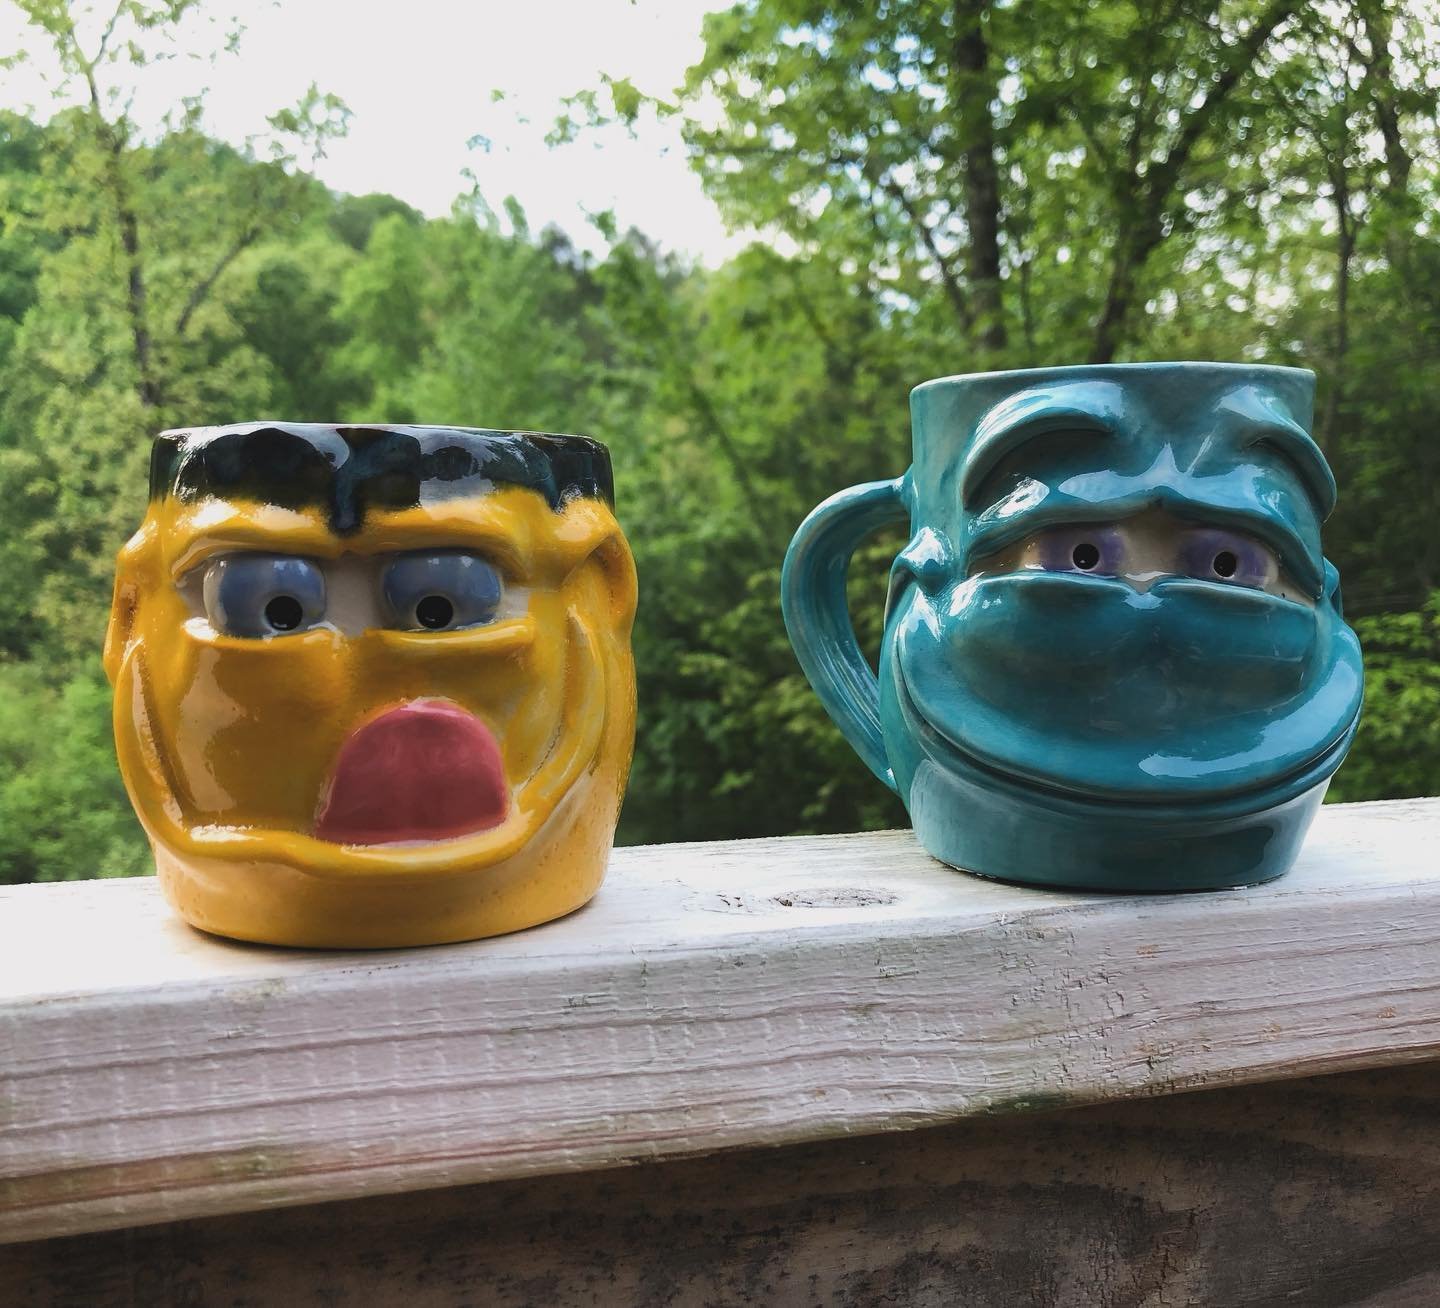 Two more mugs headed to Gillsville! Got a fresh set of happy faces to celebrate Spring. 

Come see us on May 11th at the Craven Pottery to see my new faces and one of the best collections of folk art around!

#pottery #handthrown #handsculpted #handp